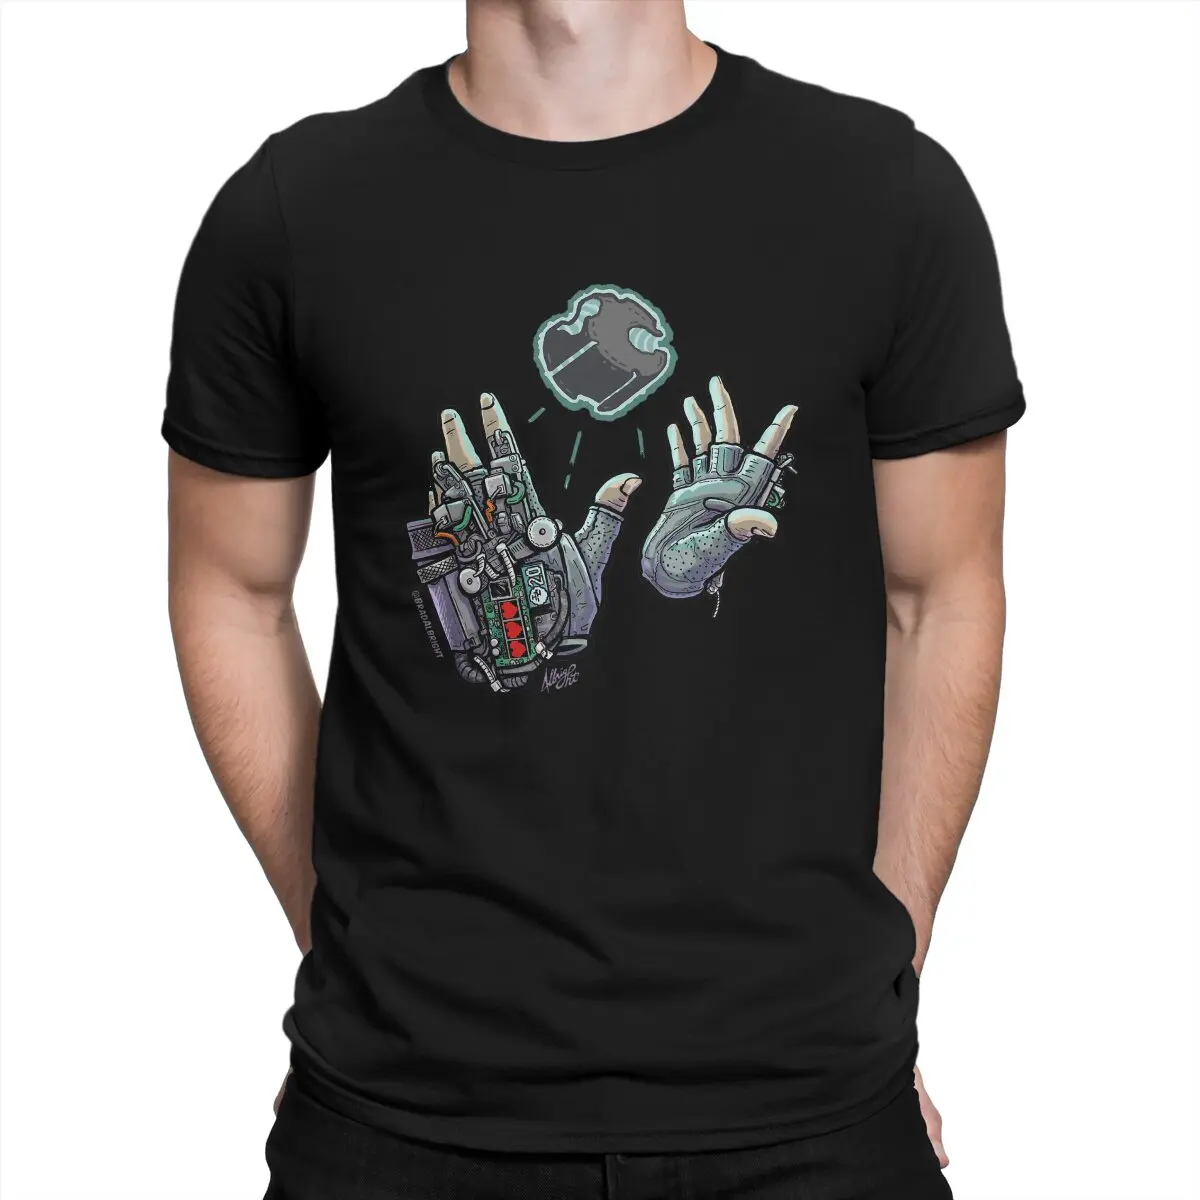 

Alyx Gravity Gloves And Combine Resin Hip Hop TShirt Half Life Casual T Shirt Newest Stuff For Adult